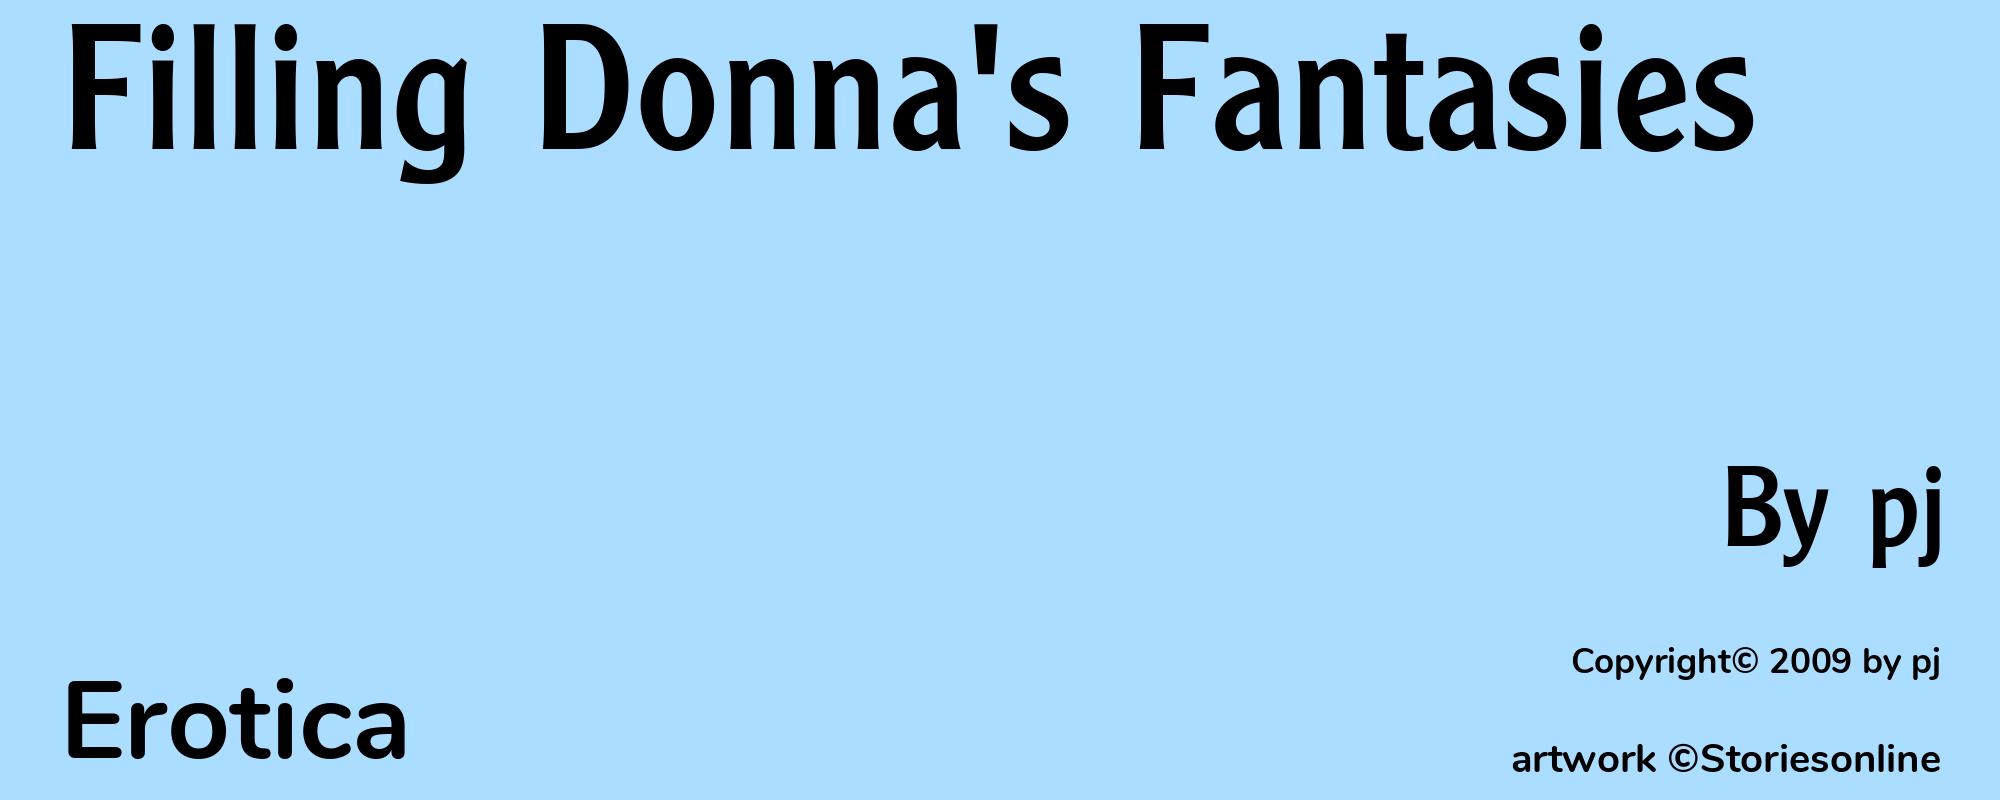 Filling Donna's Fantasies - Cover